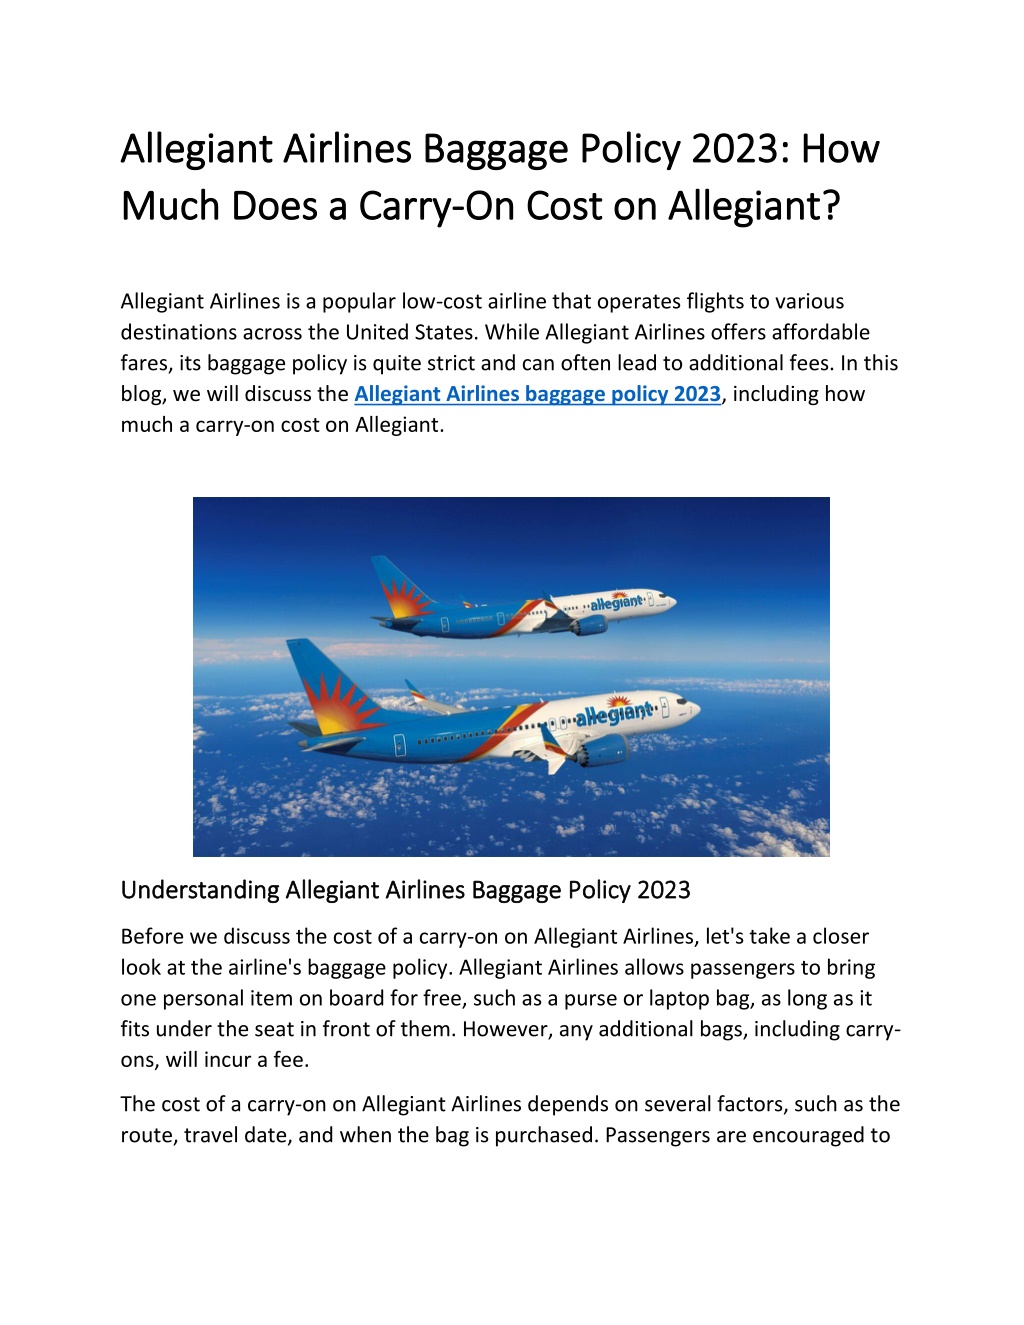 PPT How Much Does a CarryOn Cost on Allegiant PowerPoint